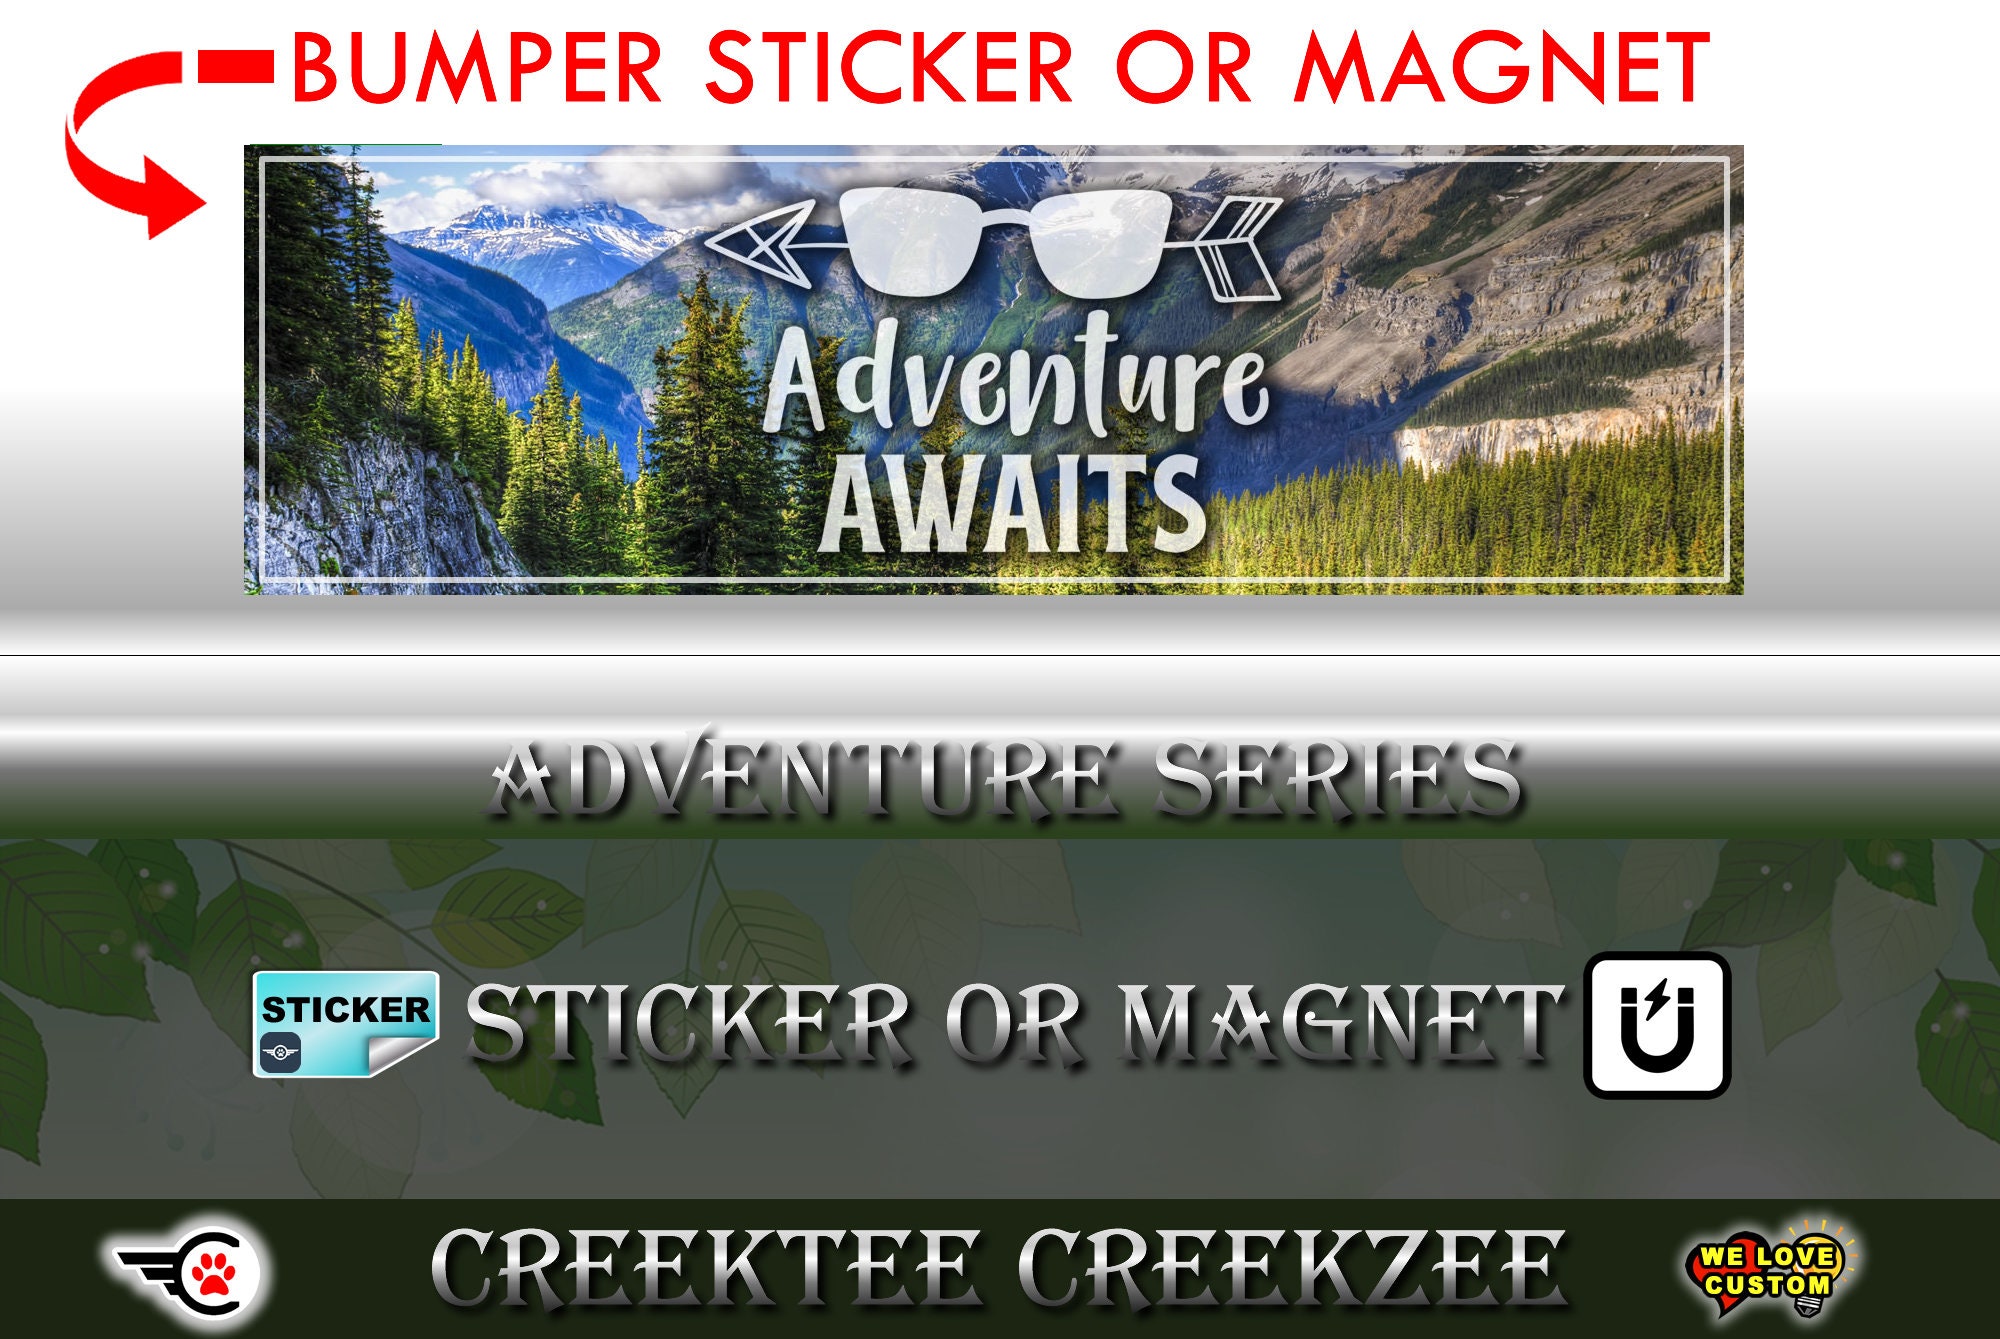 Adventure Awaits Scenic Bumper Sticker or Magnet sizes 4